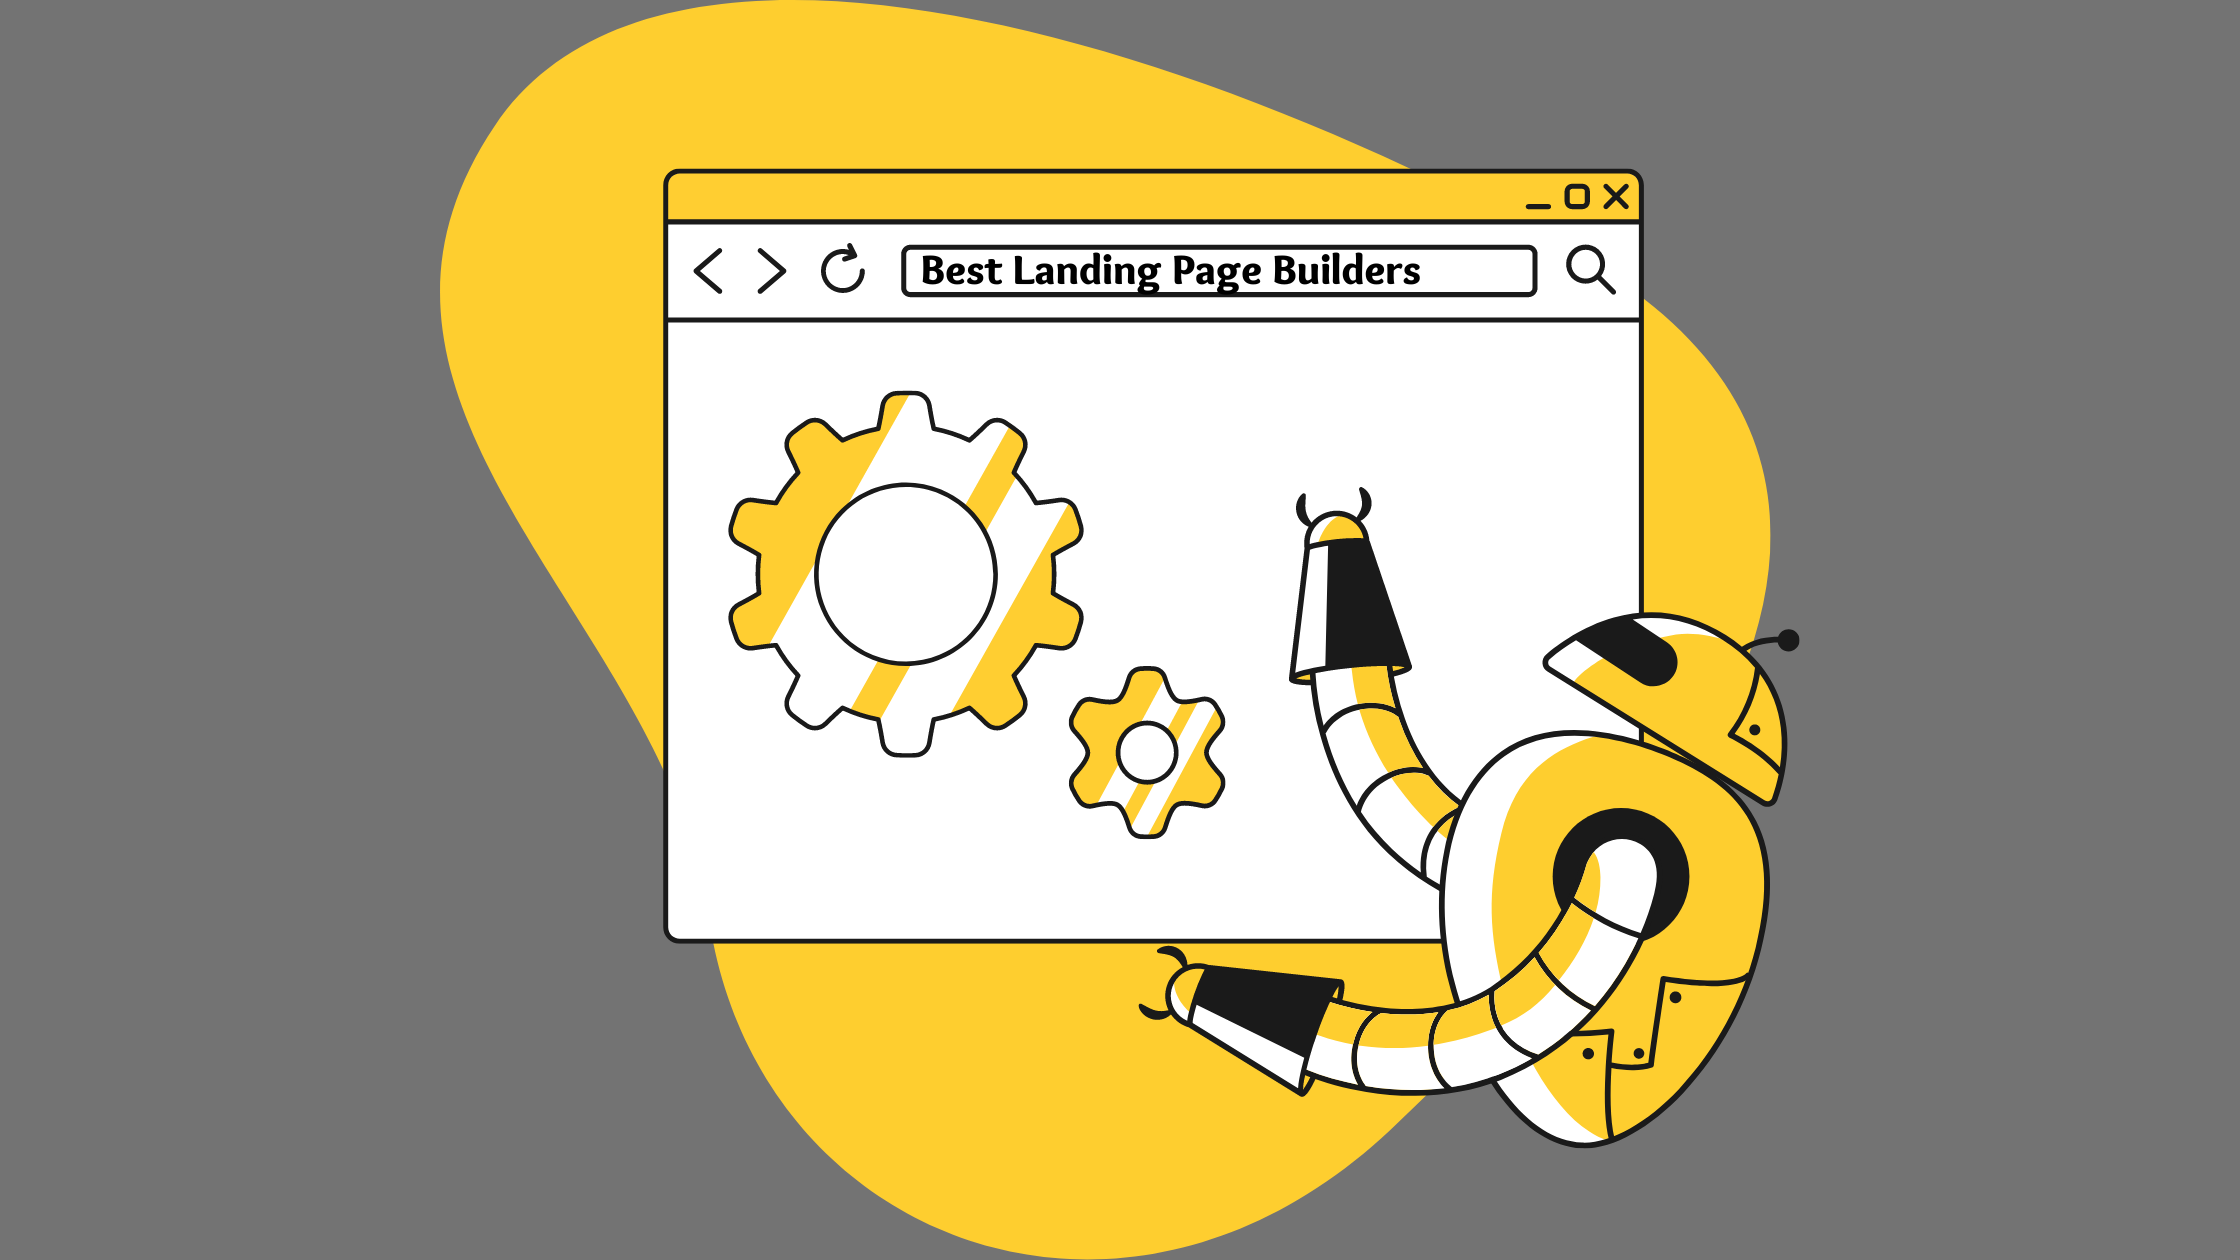 How to Create a Landing Page for Lead Generation?